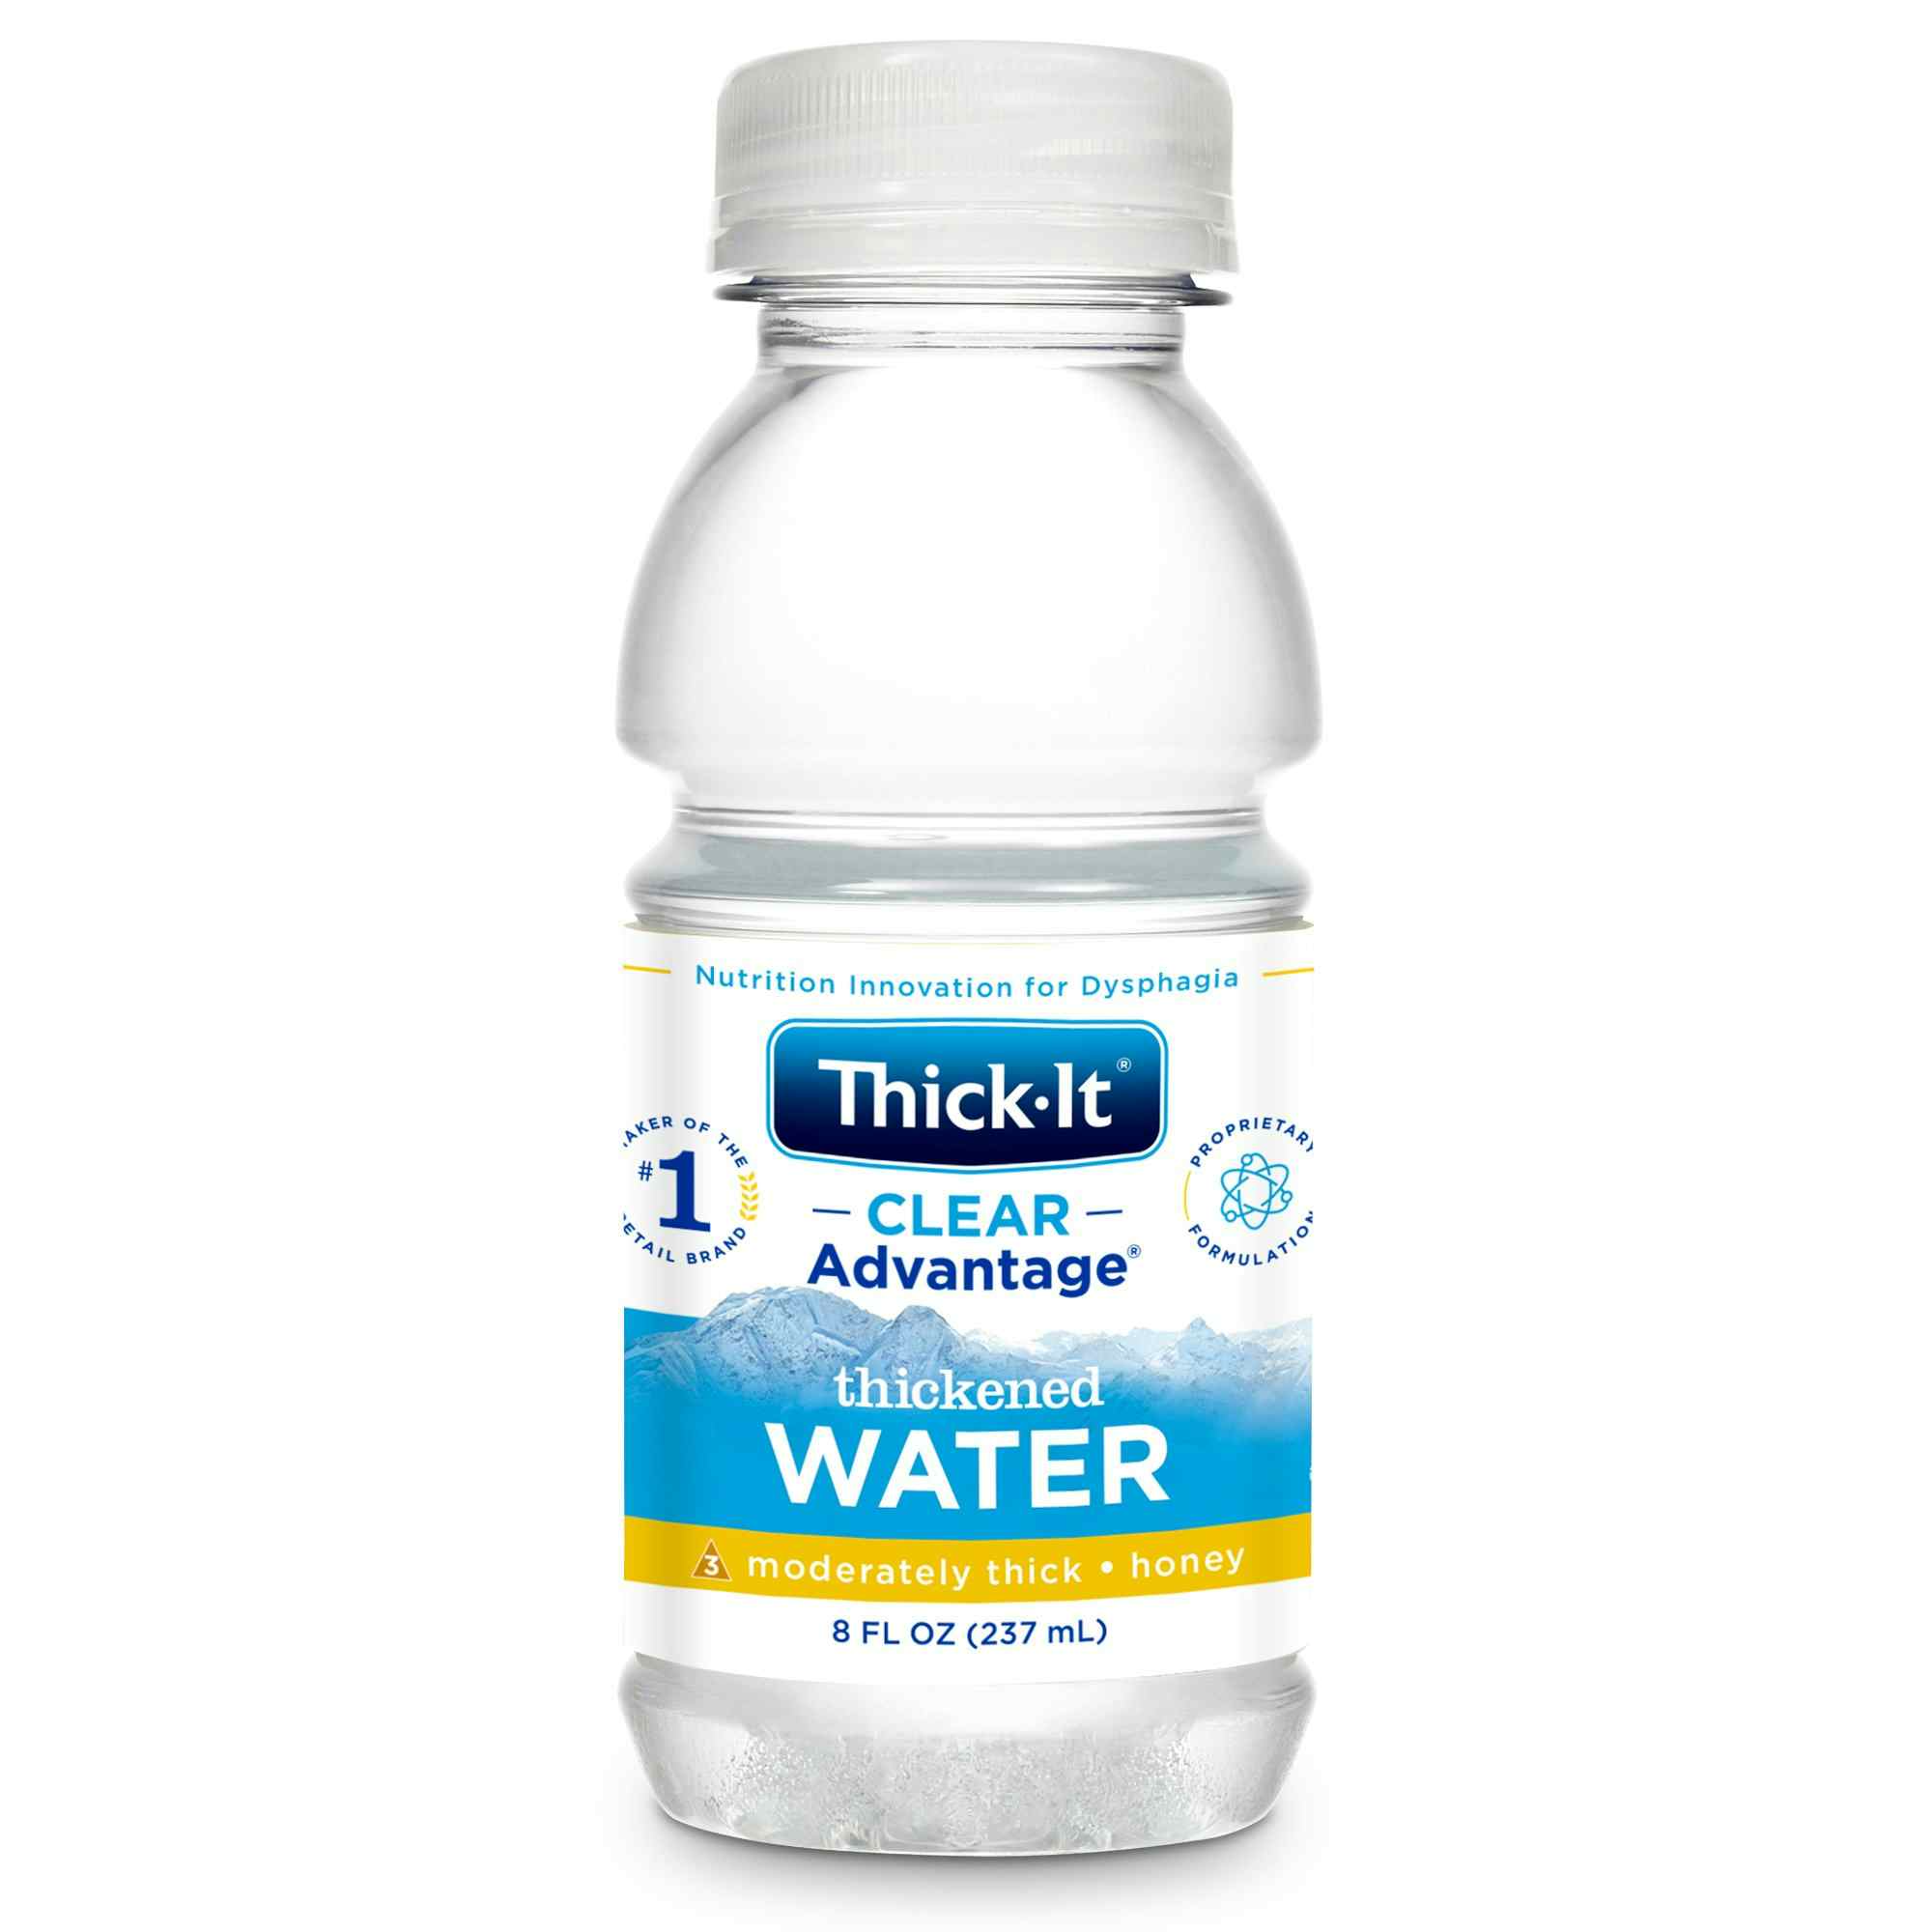 Thick-It Clear Advantage Thickened Water, Honey Consistency, Moderately Thick, B453-L9044, 8 oz. - Case of 24